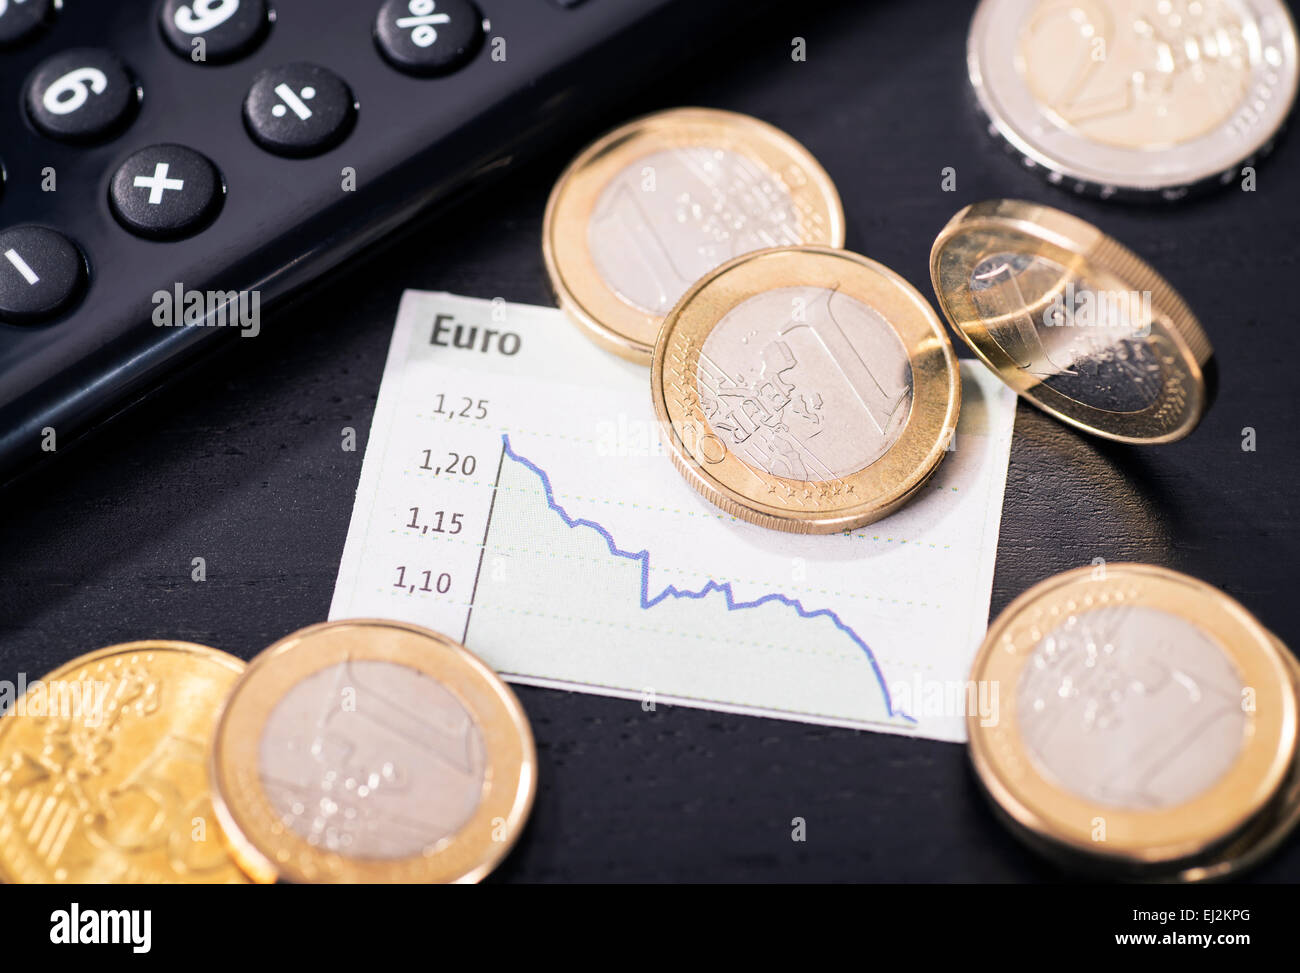 A graphic shows the falling euro rate and is surrounded by euro coins. Stock Photo